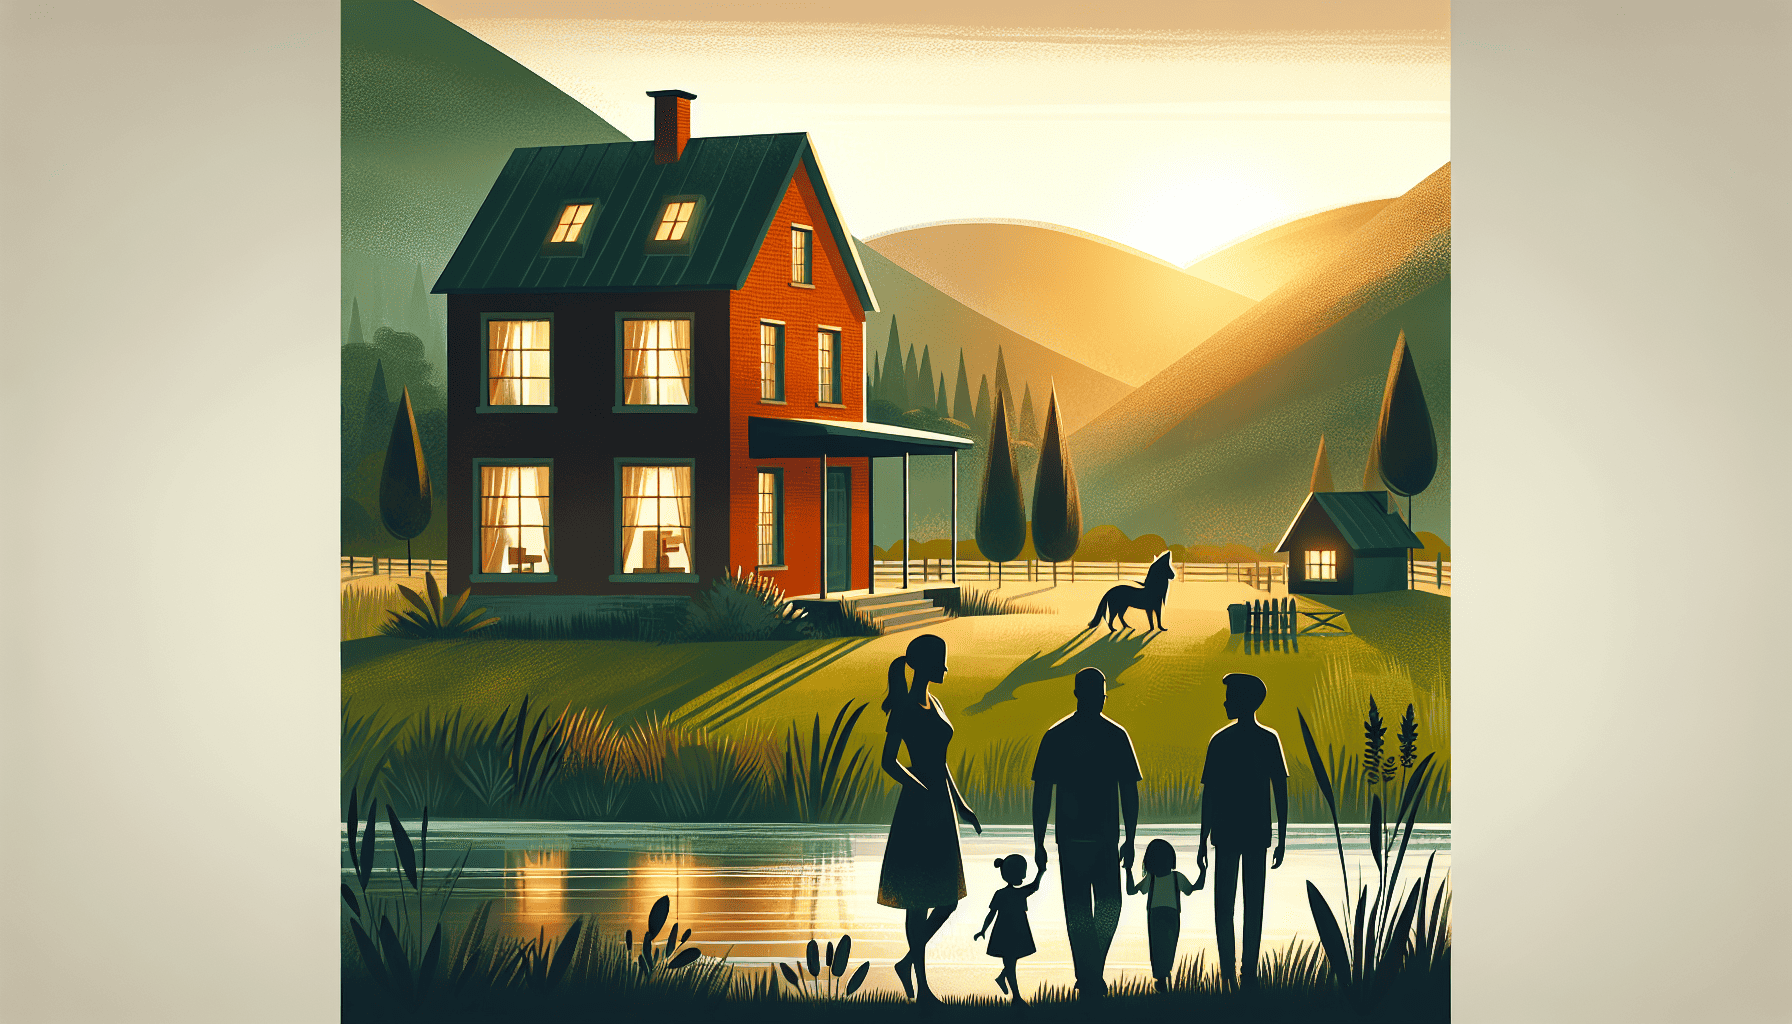 A serene illustration of the Tulliver family home, portraying the familial setting in The Mill on the Floss